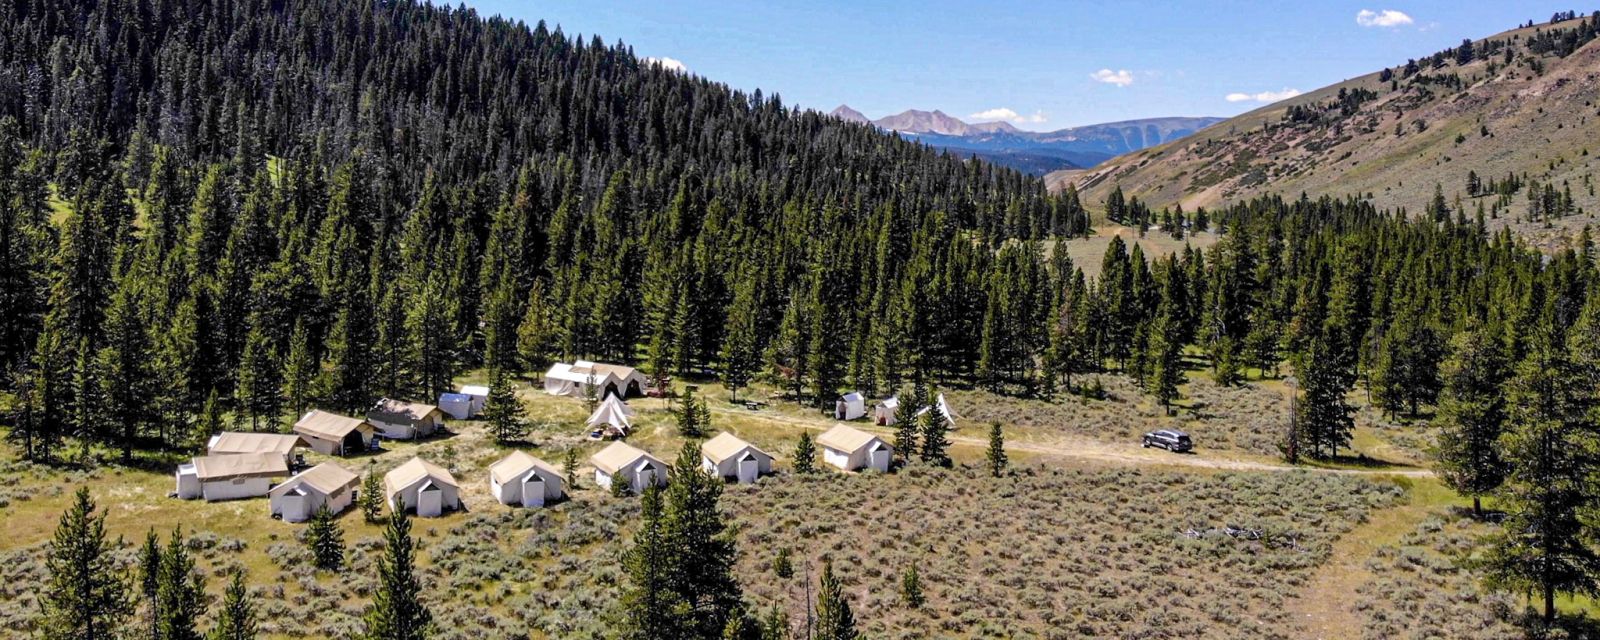 Aerial view of a private campsite in Yellowstone National Park